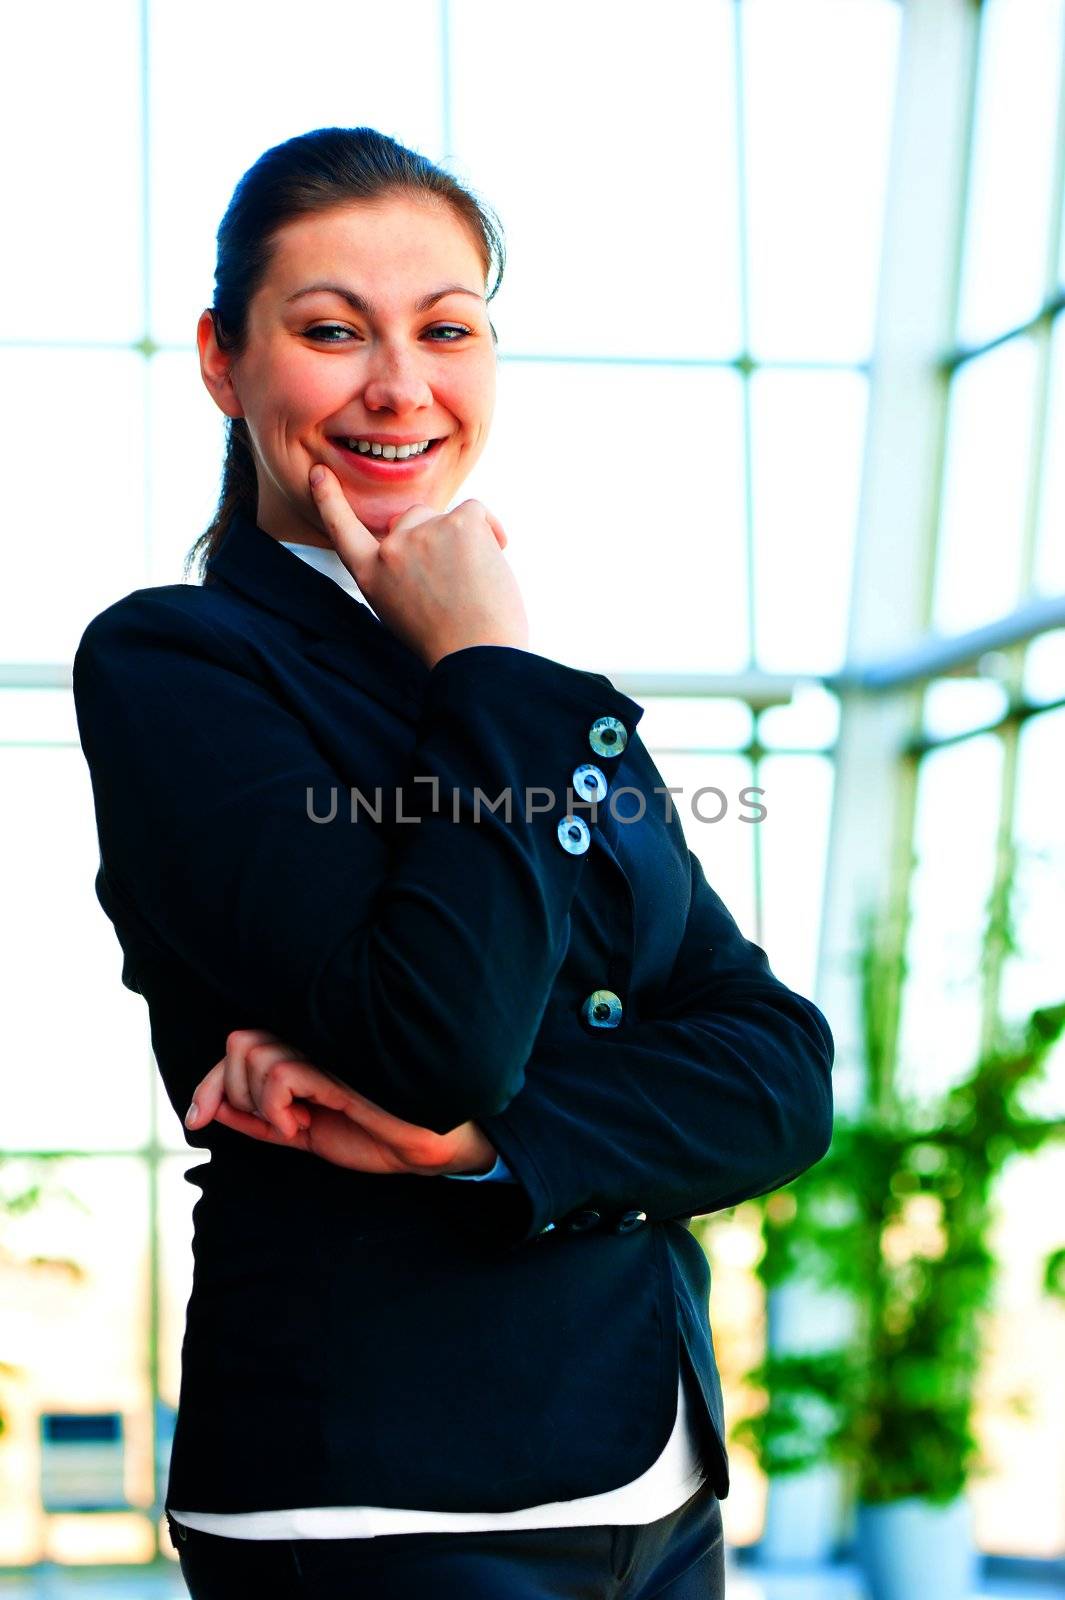 Portrait of smiling successful business people on the background of a blurred office interior